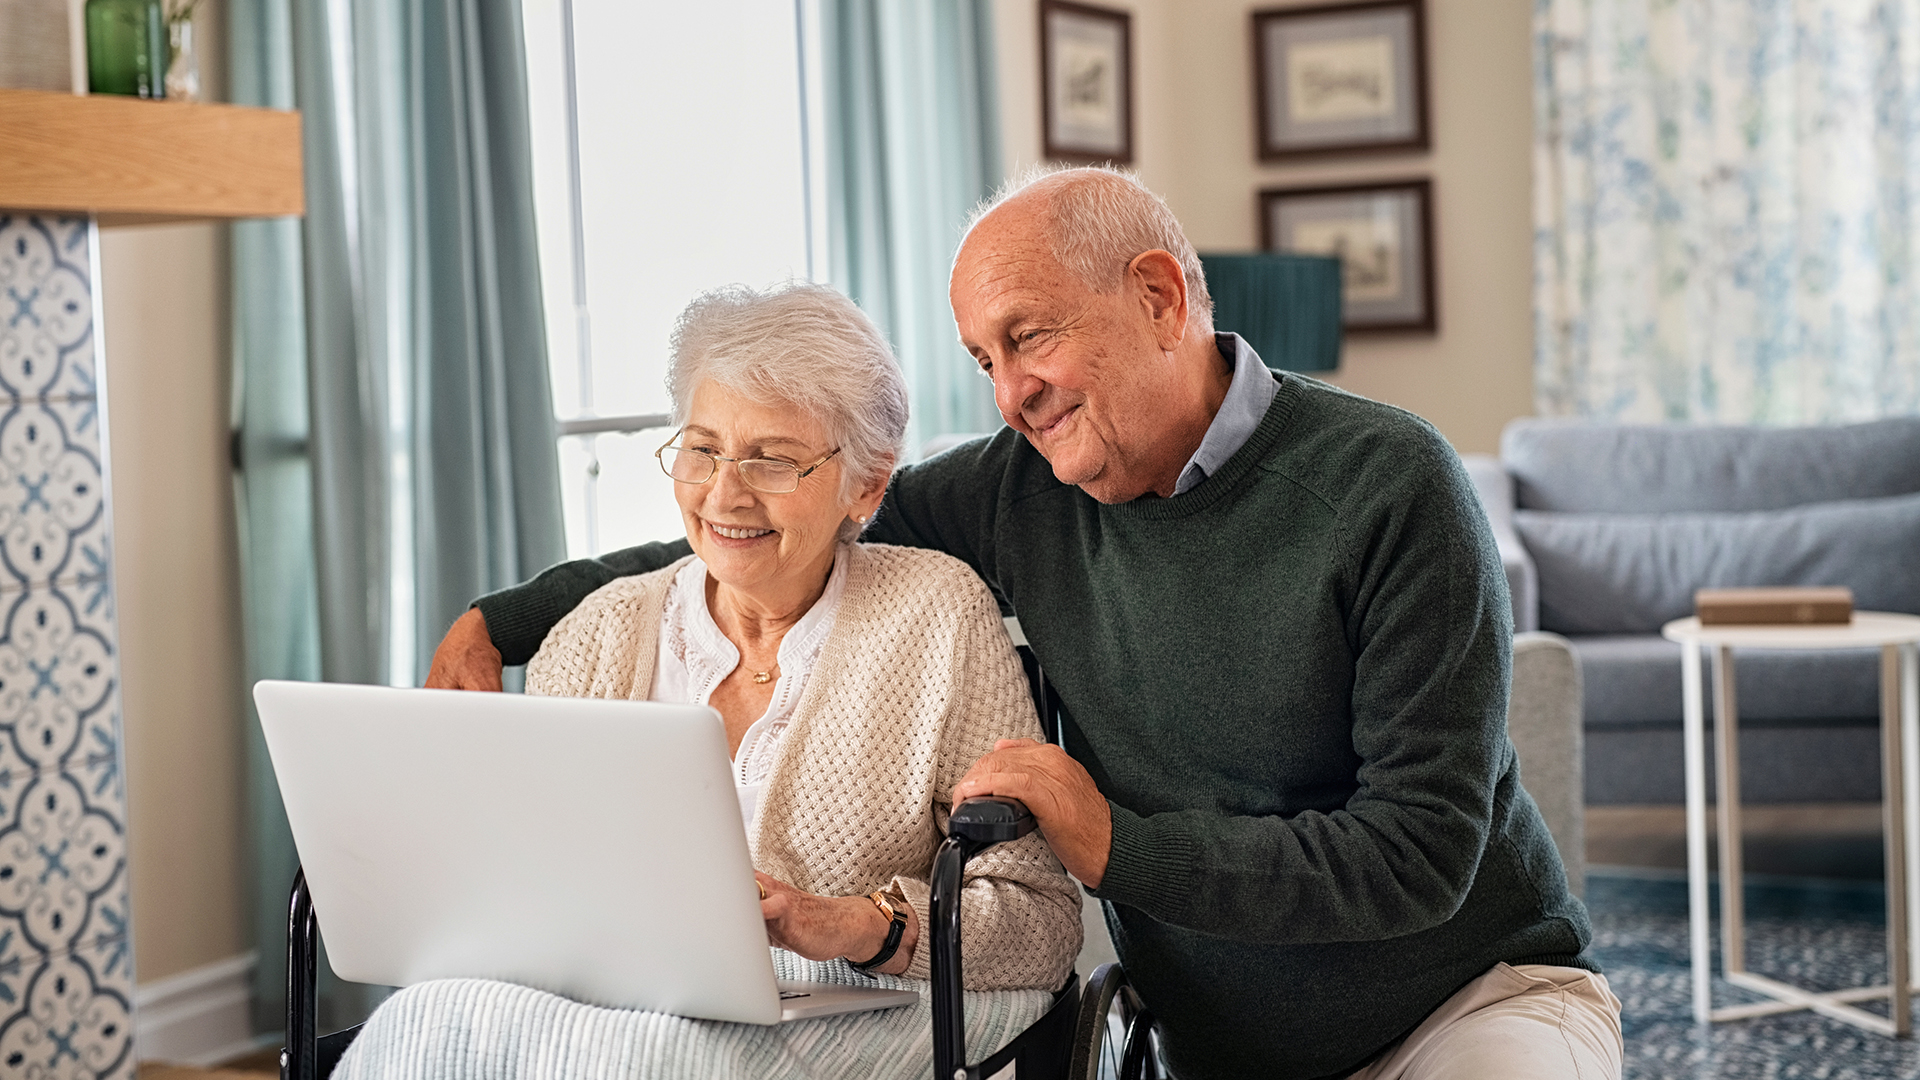 senior couple looking at a laptop together in the living room